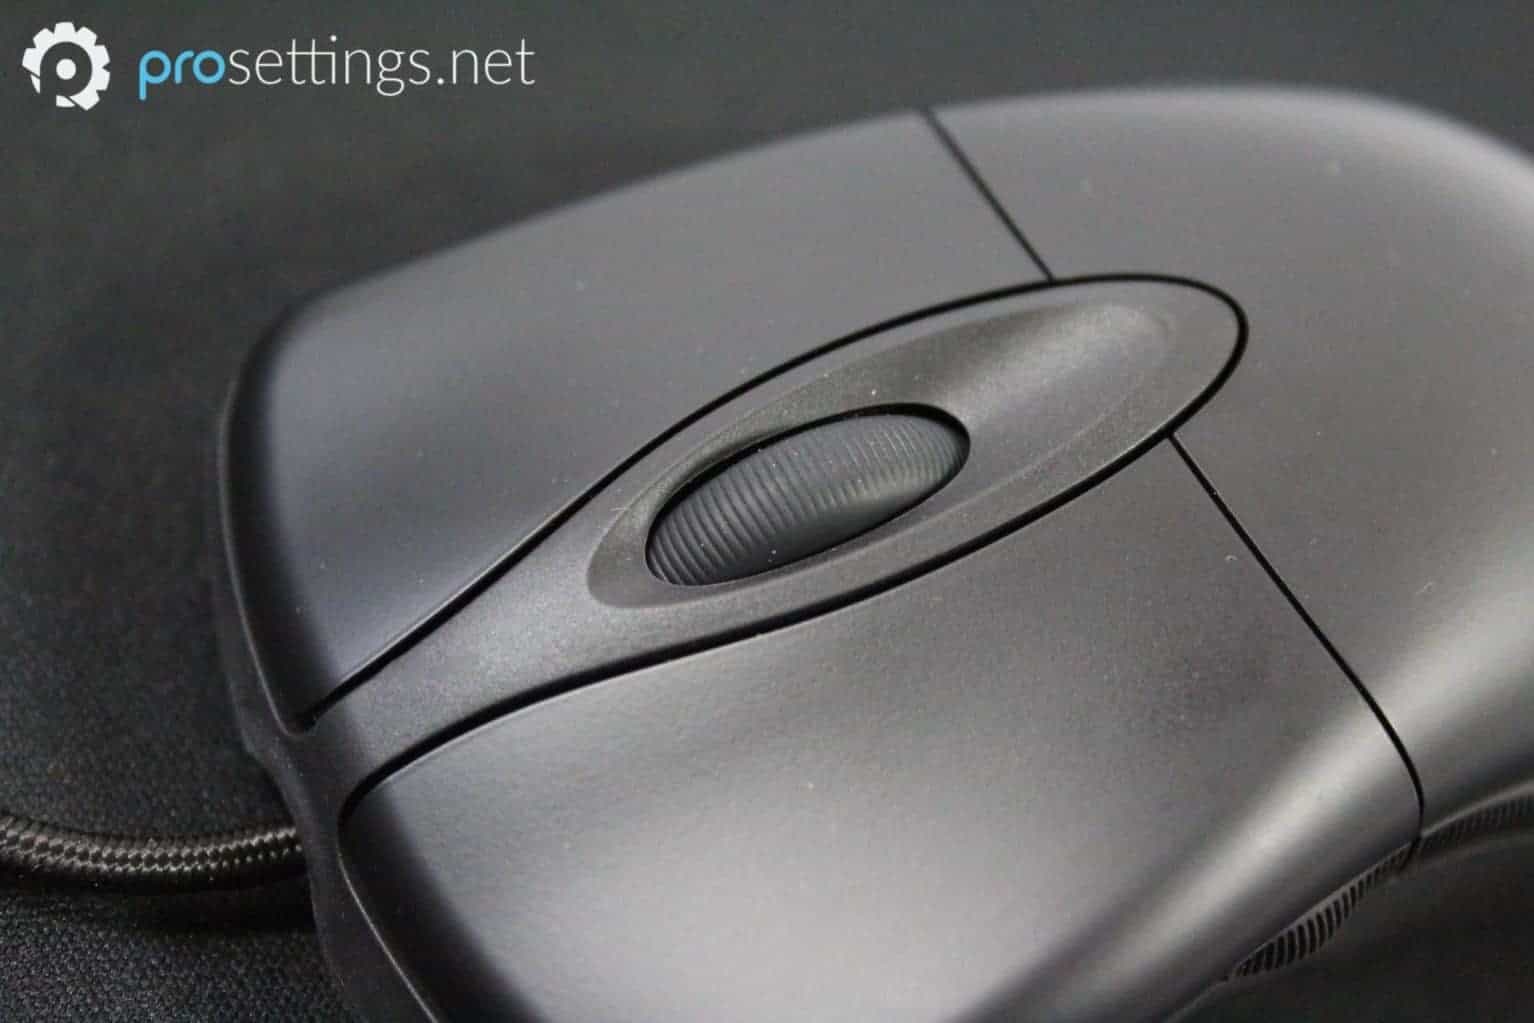 Microsoft Intellimouse Pro Review Buttons and Scroll